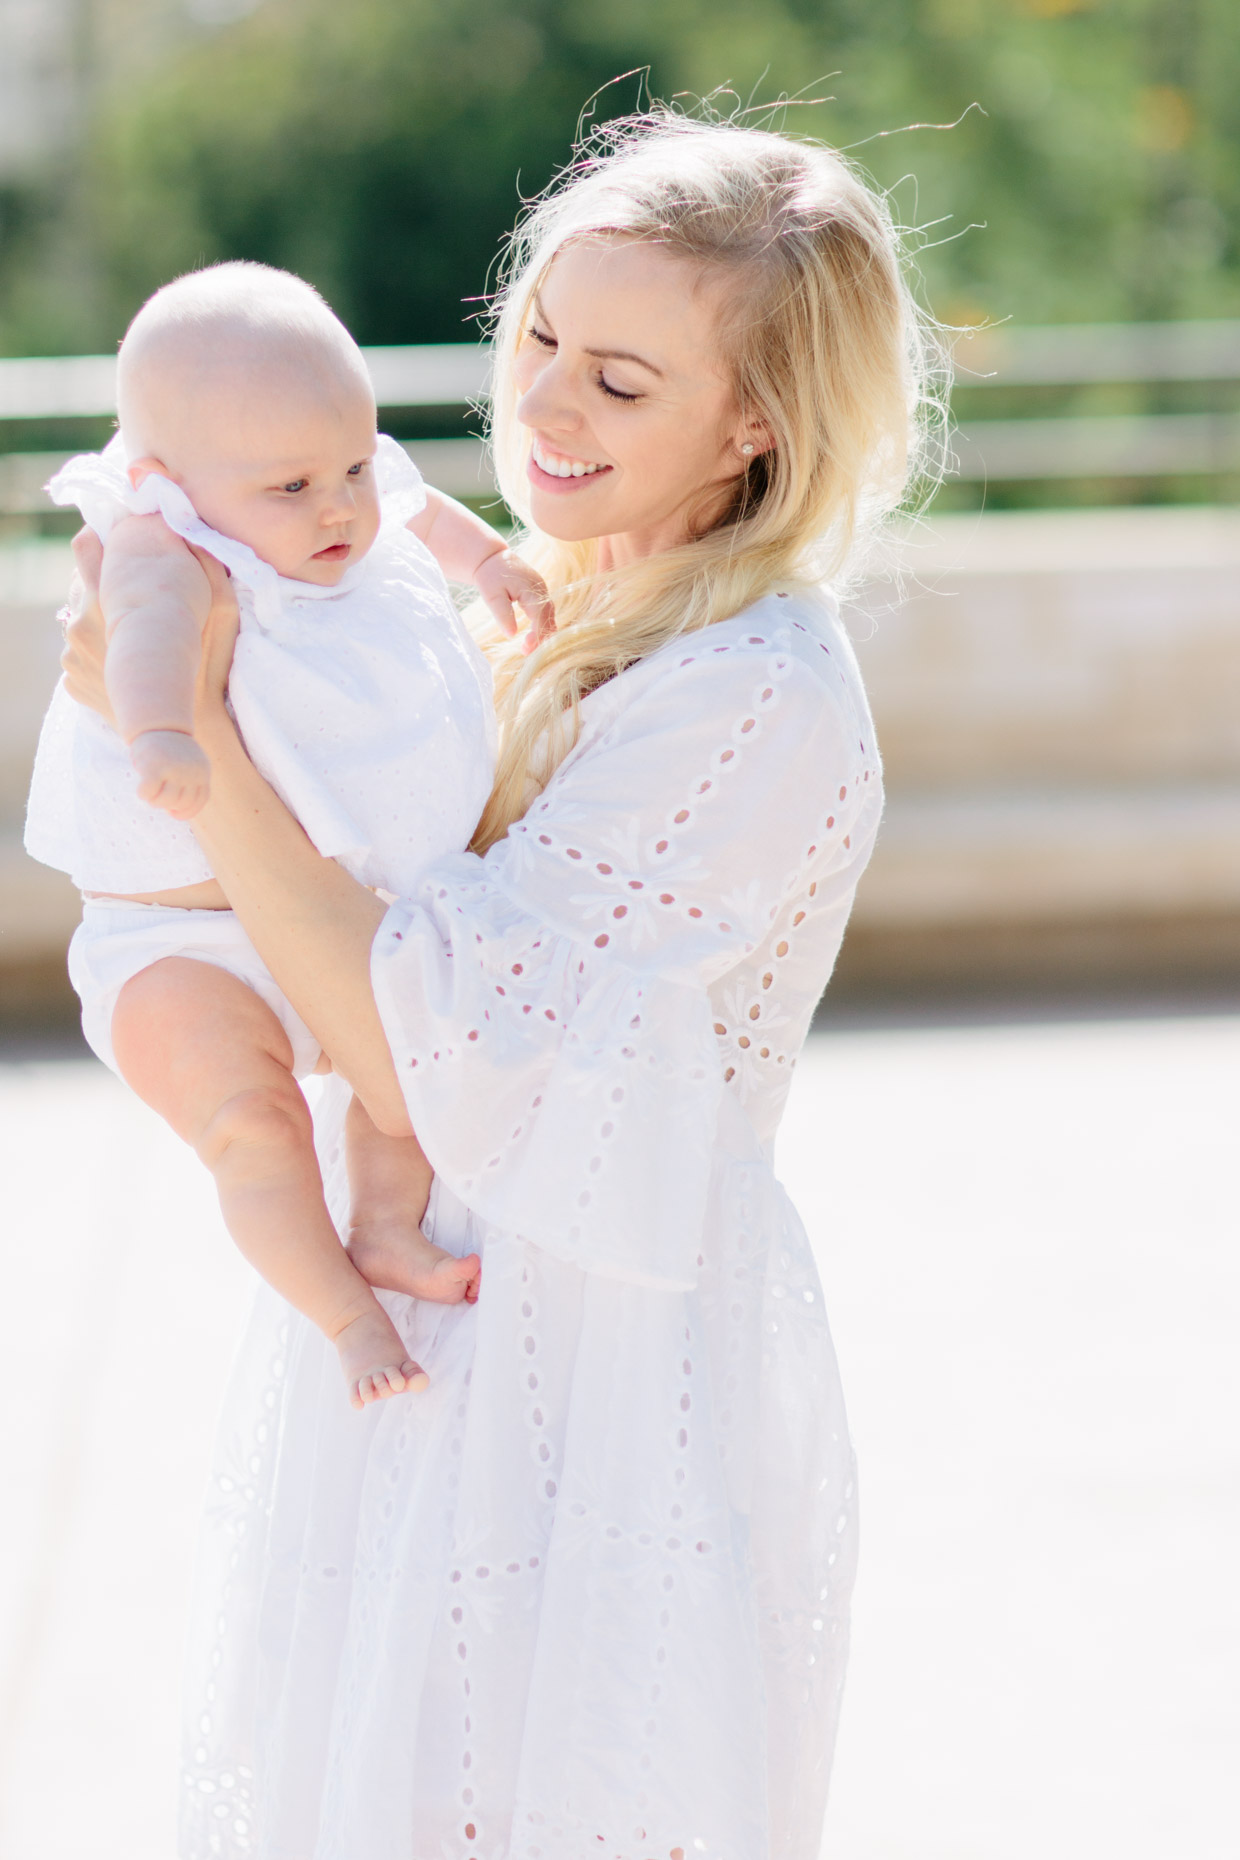 matching white dresses for mother and daughter